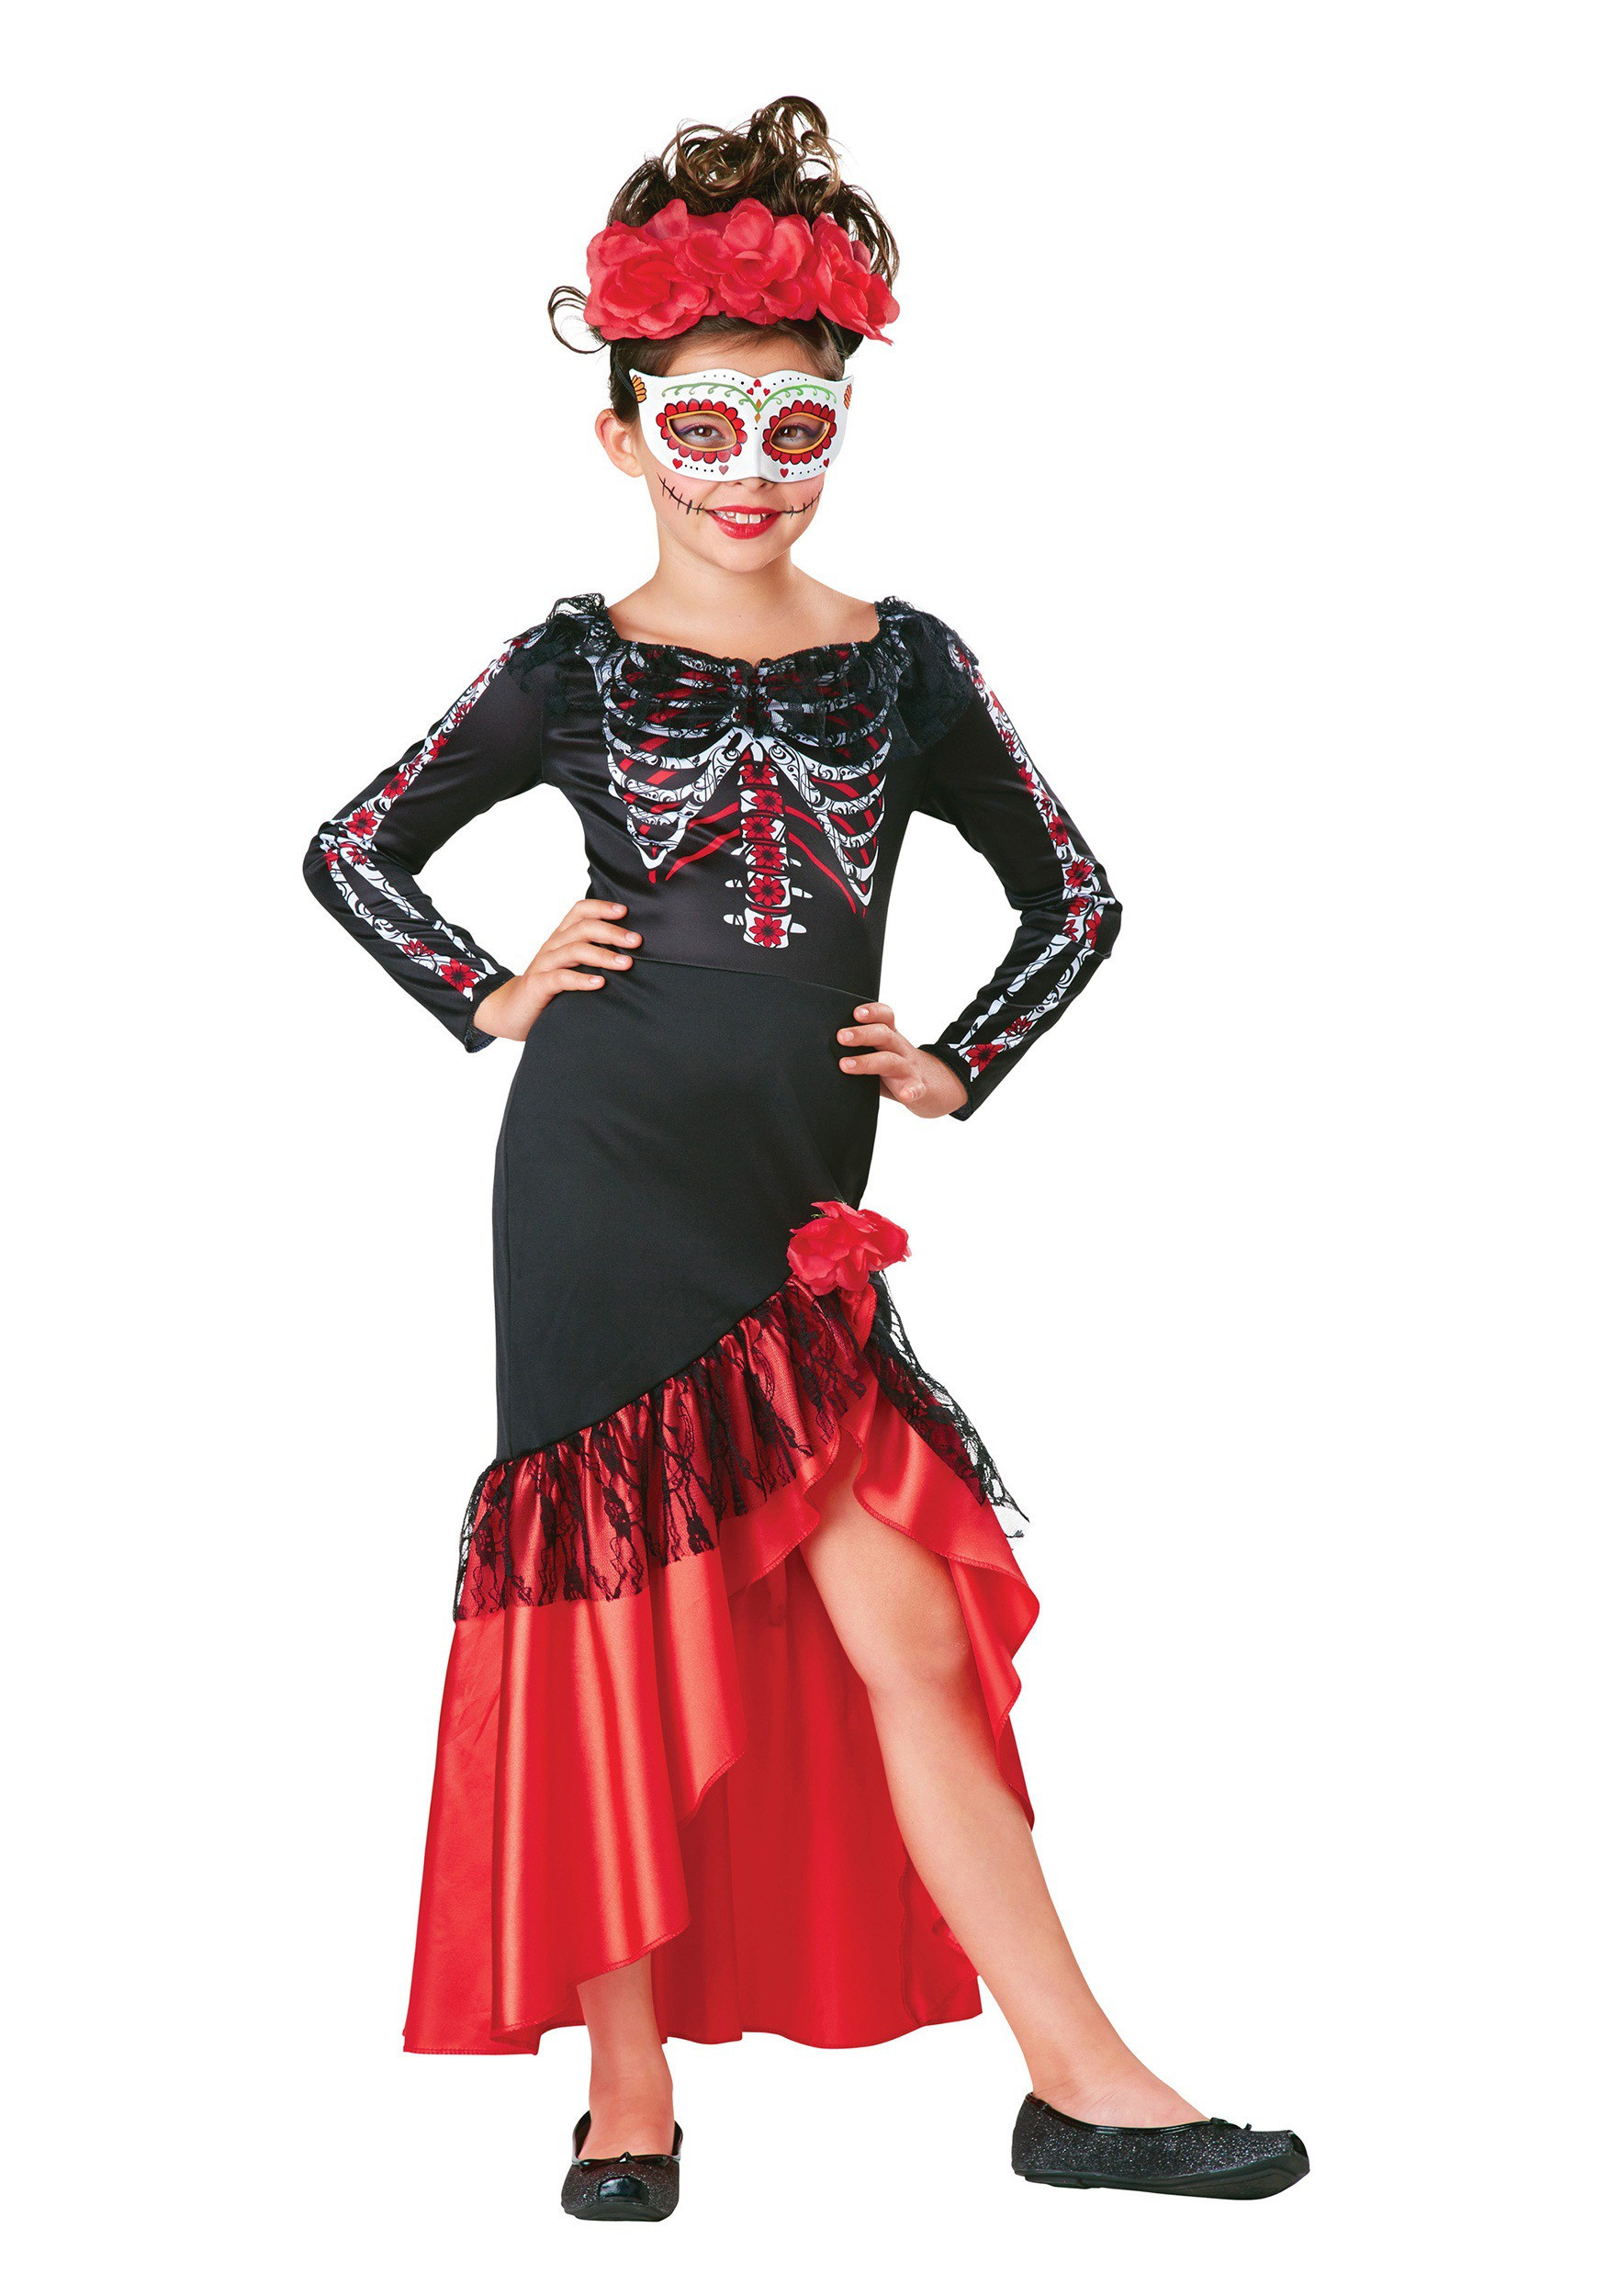 Day Of The Dead Halloween Costume Ideas
 Child s Day of the Dead Senorita Costume